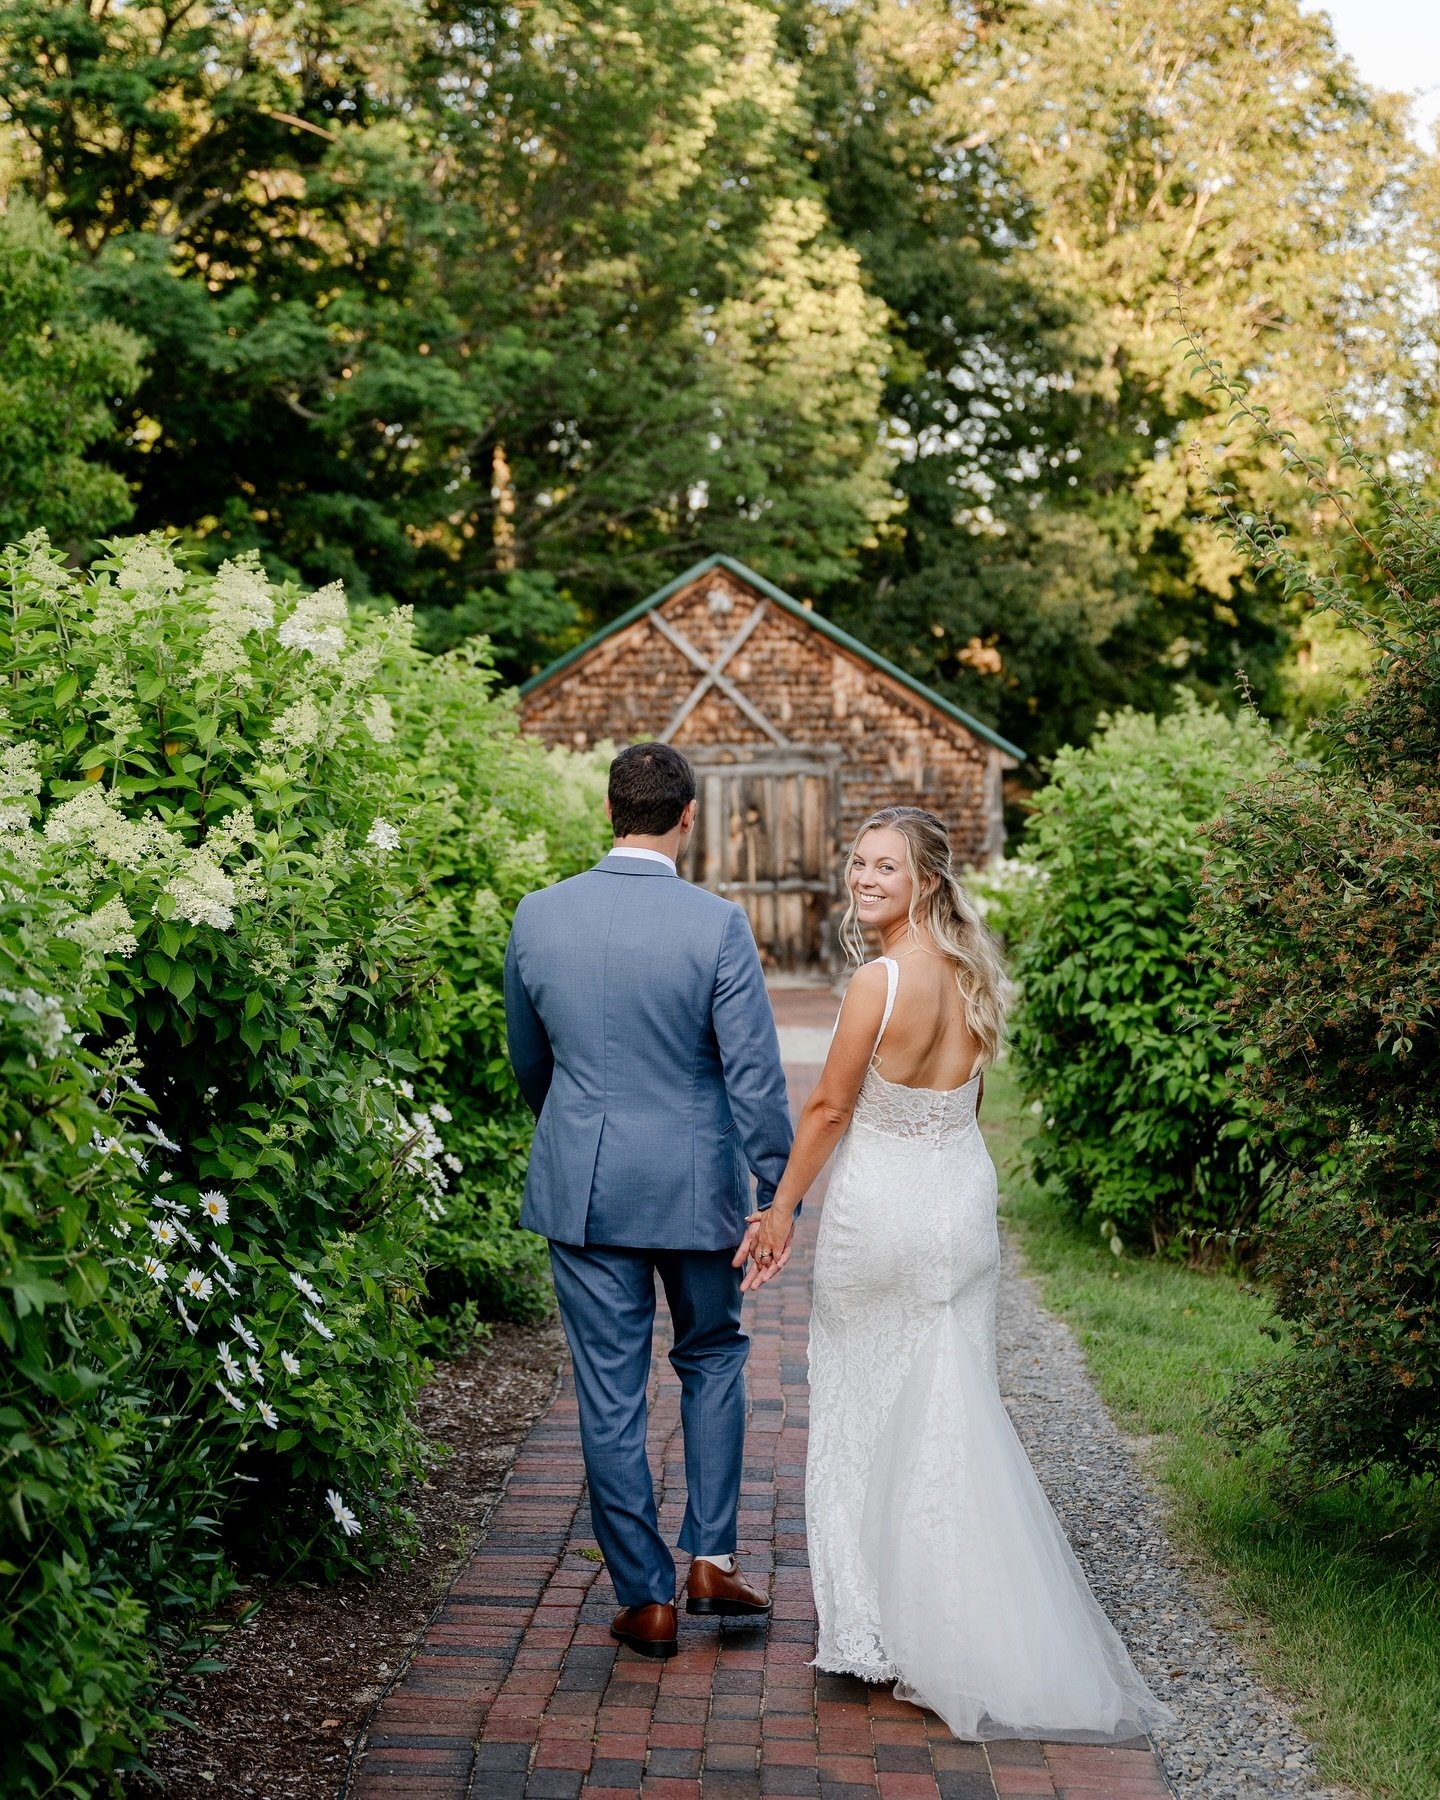 Stepping into forever, framed by nature&rsquo;s splendor at The Preserve. 🌿

Imagery | @annasolophotos